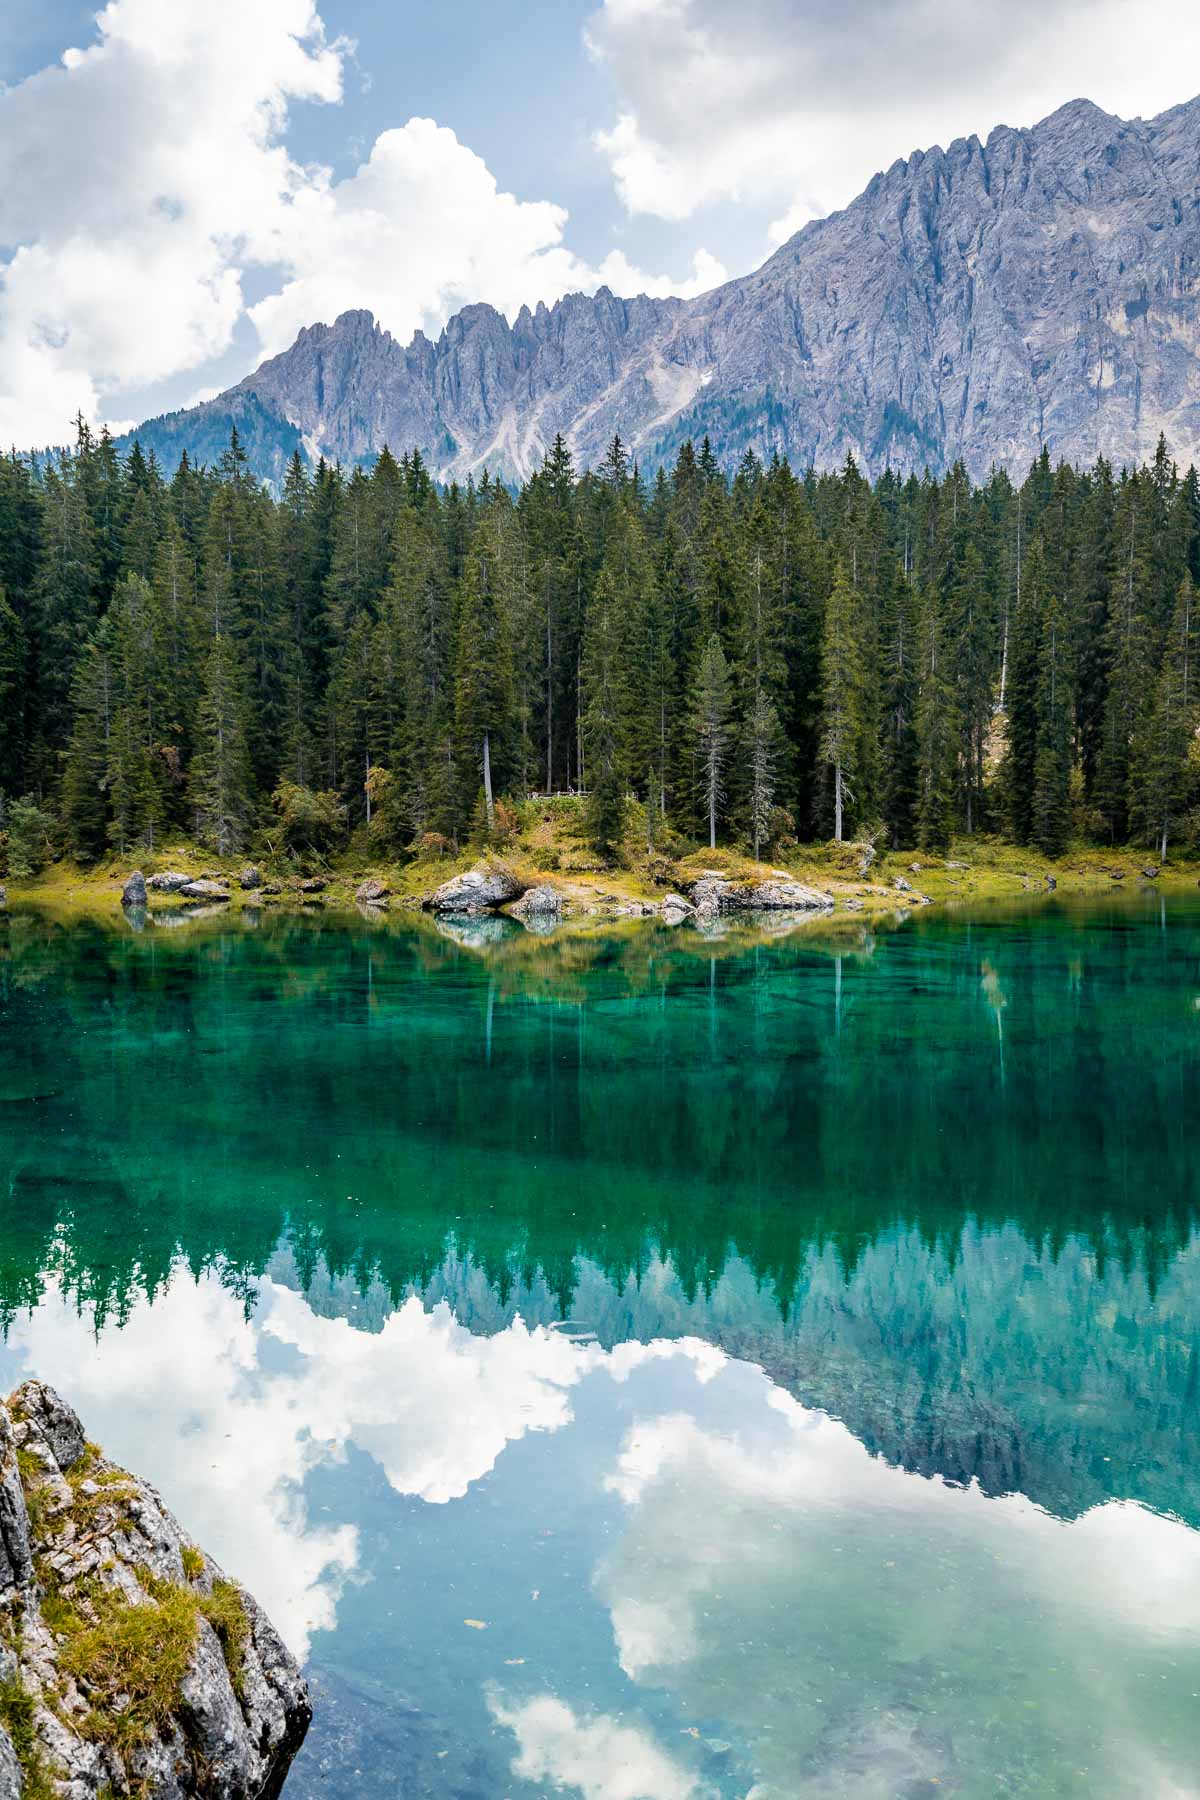 Reflections at Lago di Carezza, one of the most beautiful lakes in the Dolomites